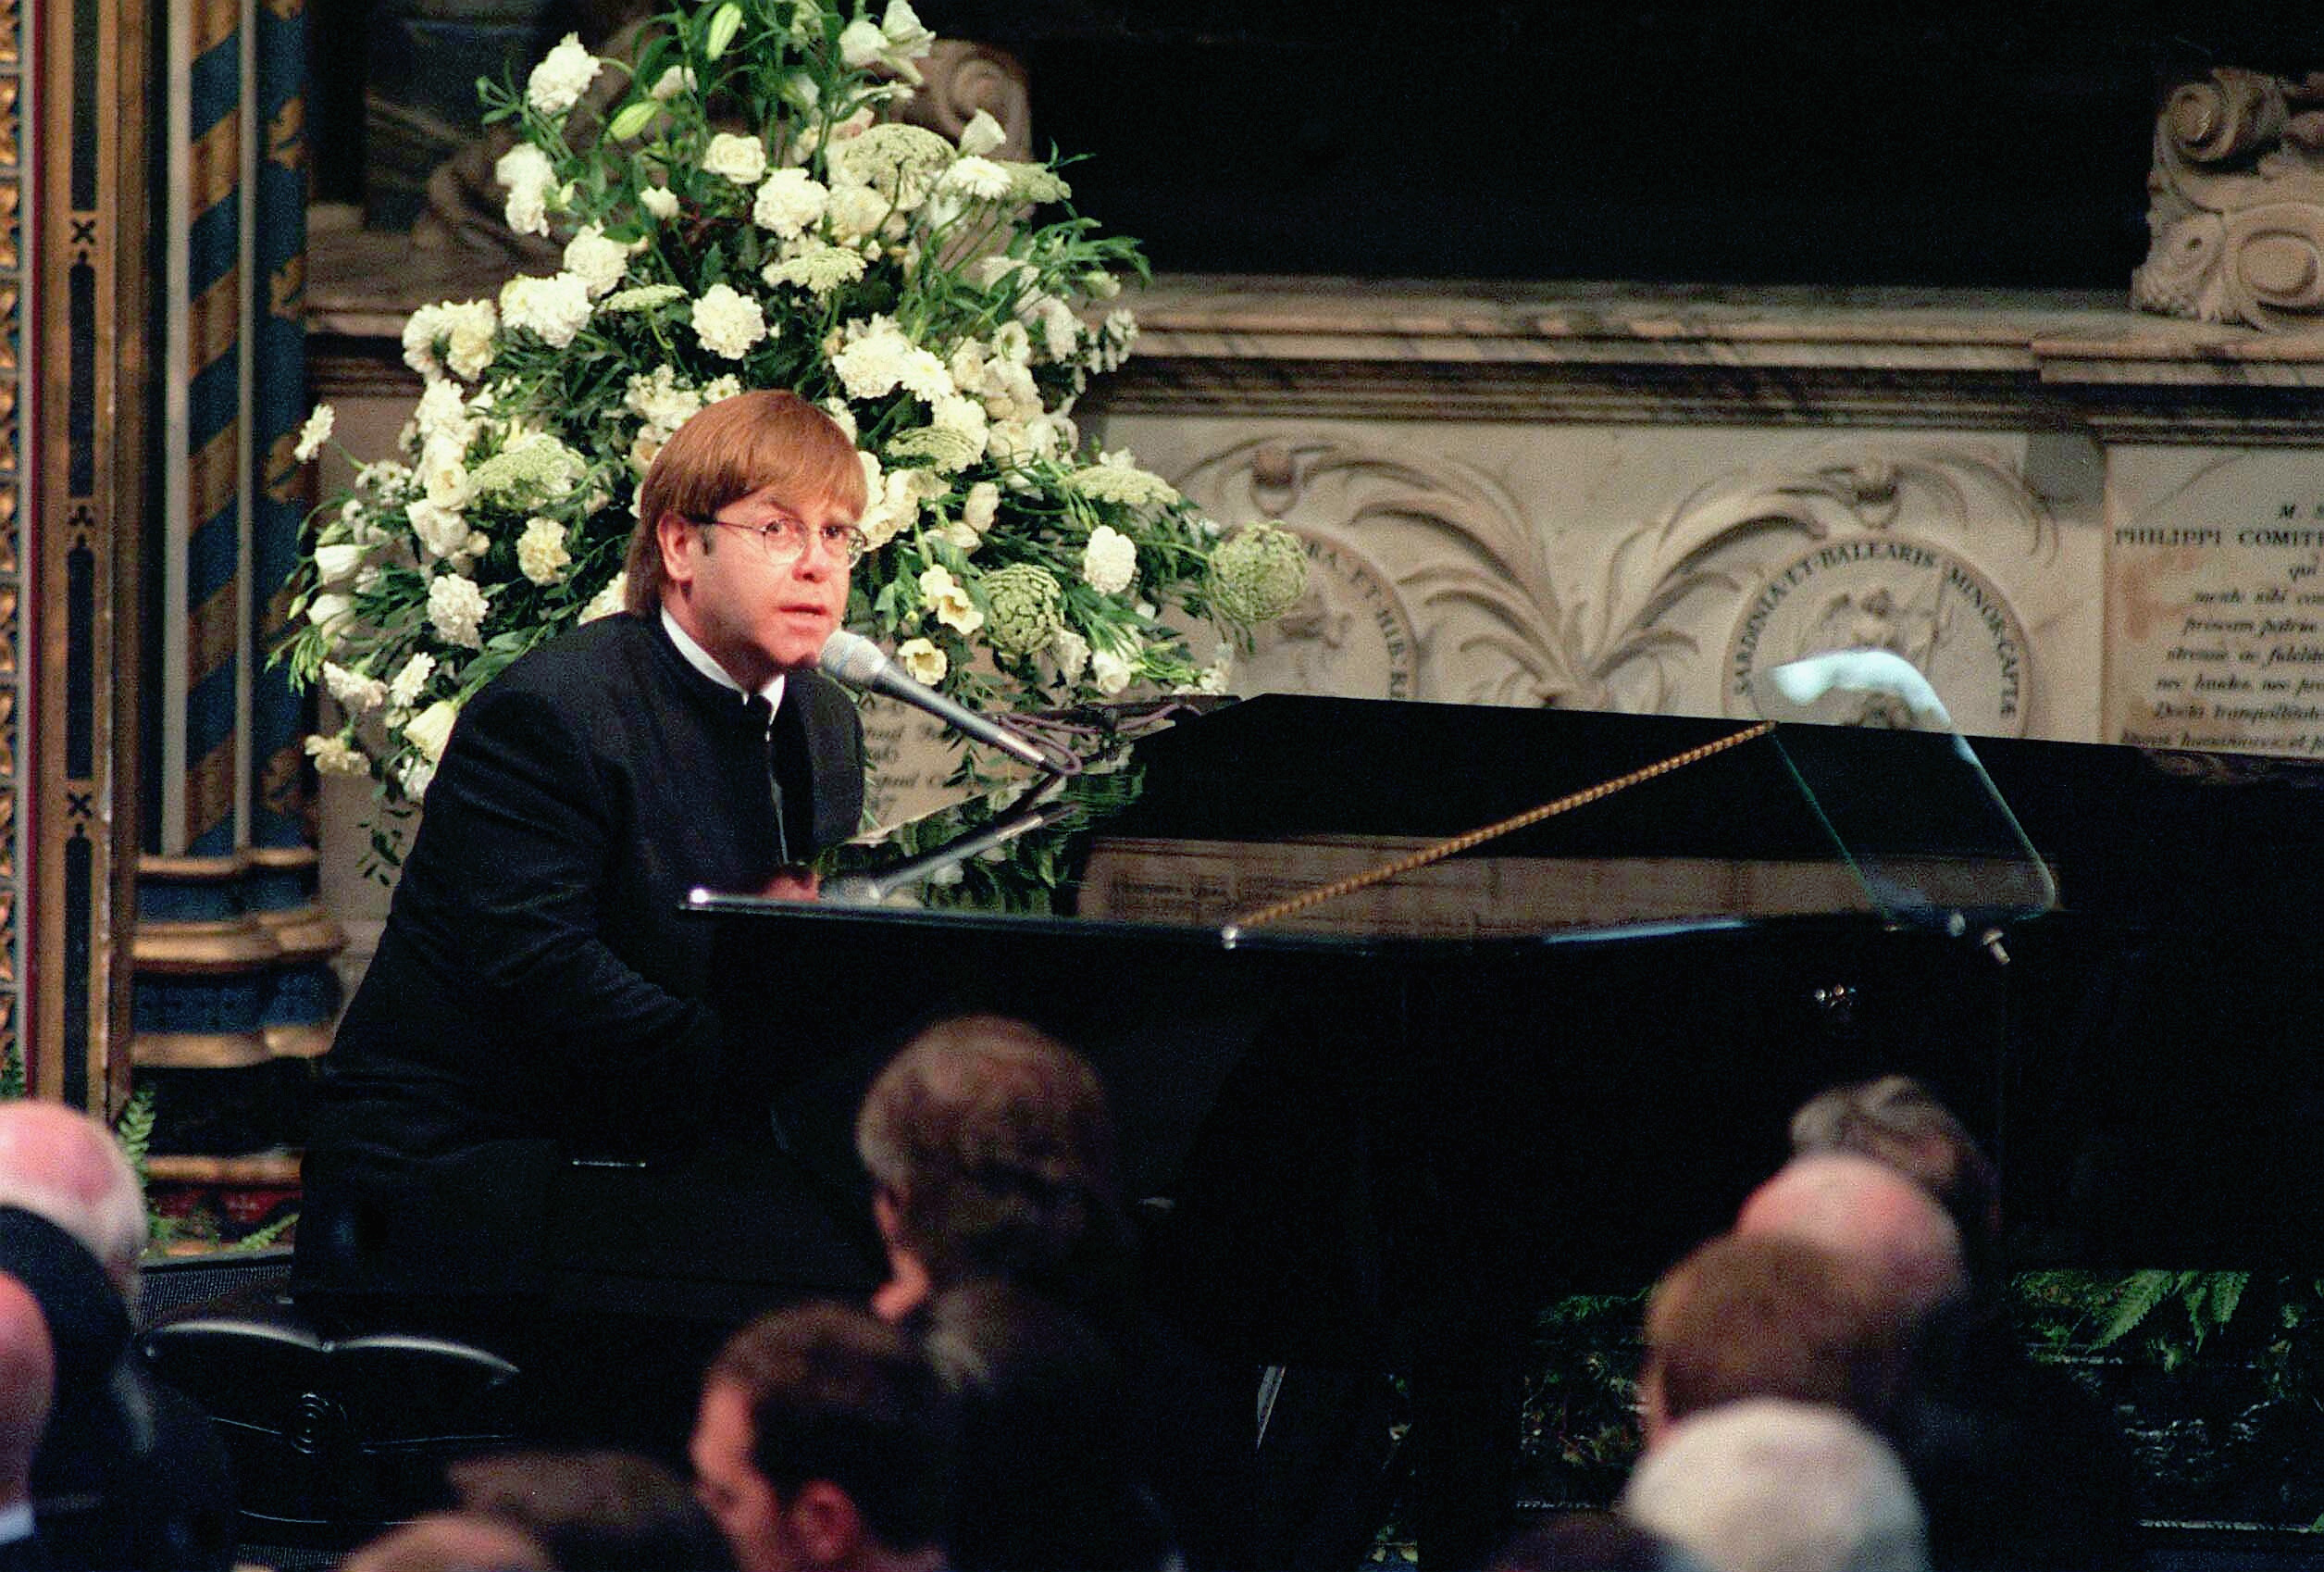 Sir Elton John sings 'Candle in the Wind' at the funeral of Diana, Princess of Wales at Westminster Abbey in 1997 (Anwar Hussein&mdash;Getty Images)